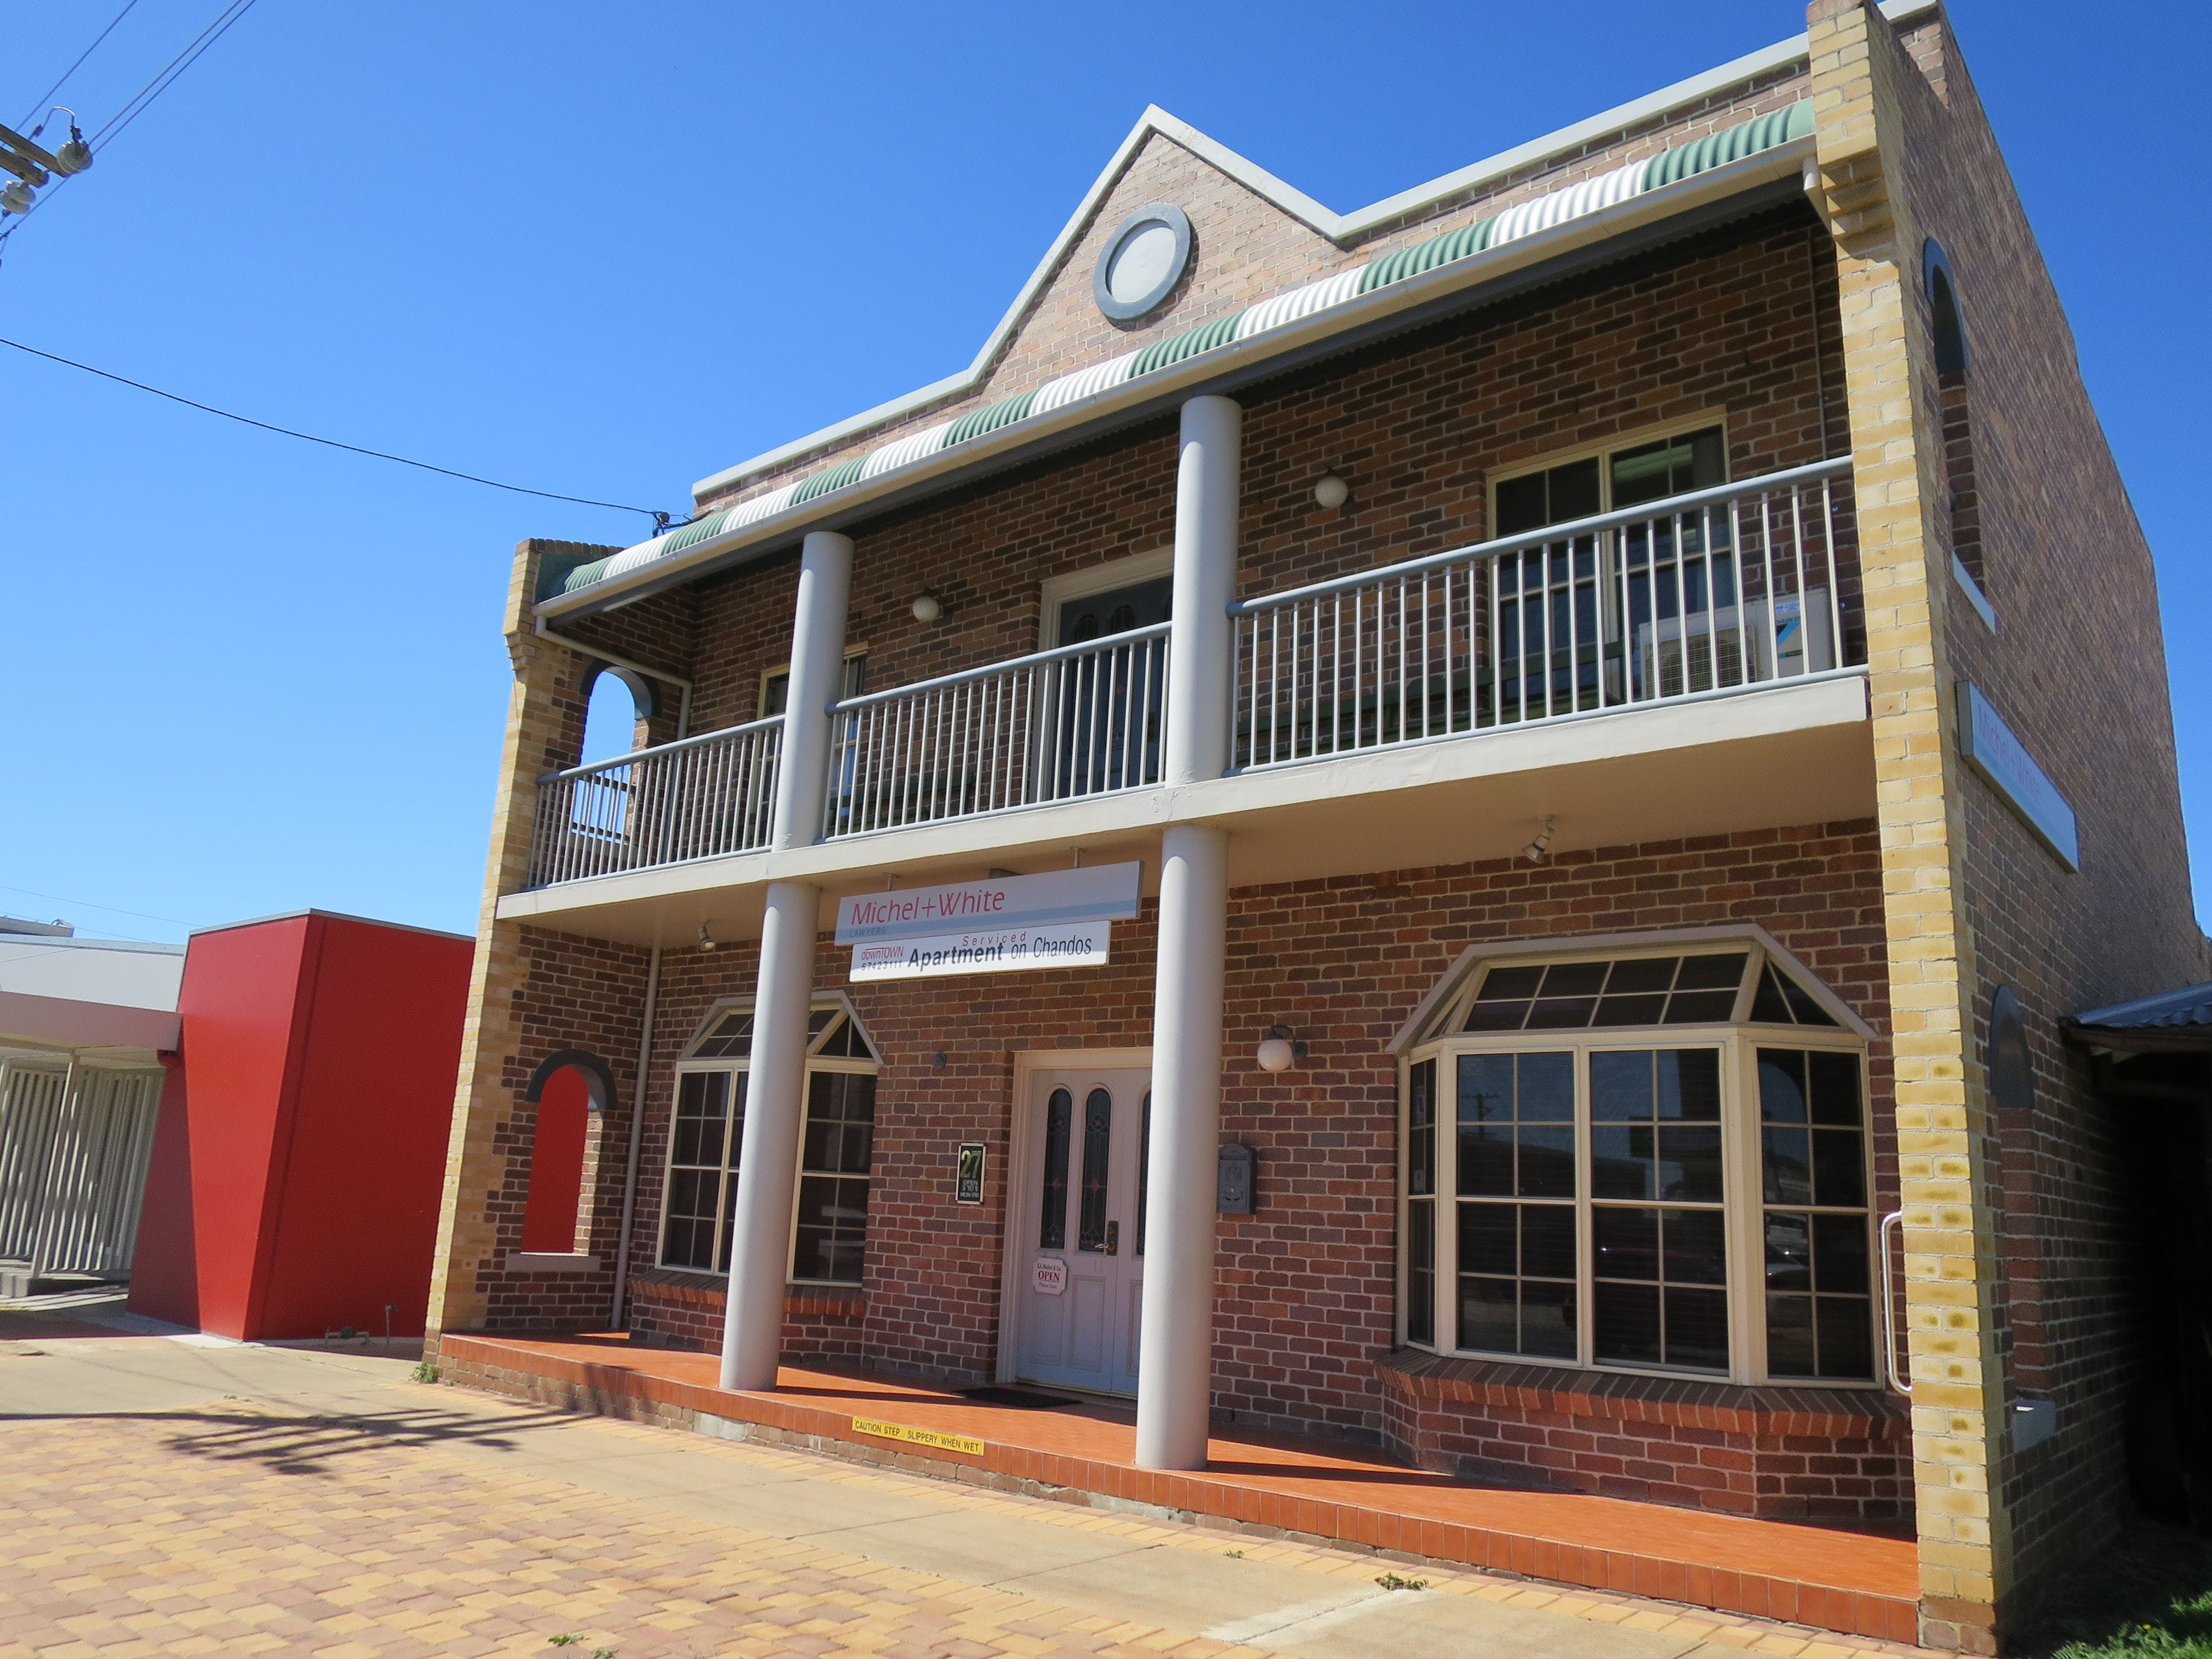 Downtown Apartment on Chandos - Nambucca Heads Accommodation